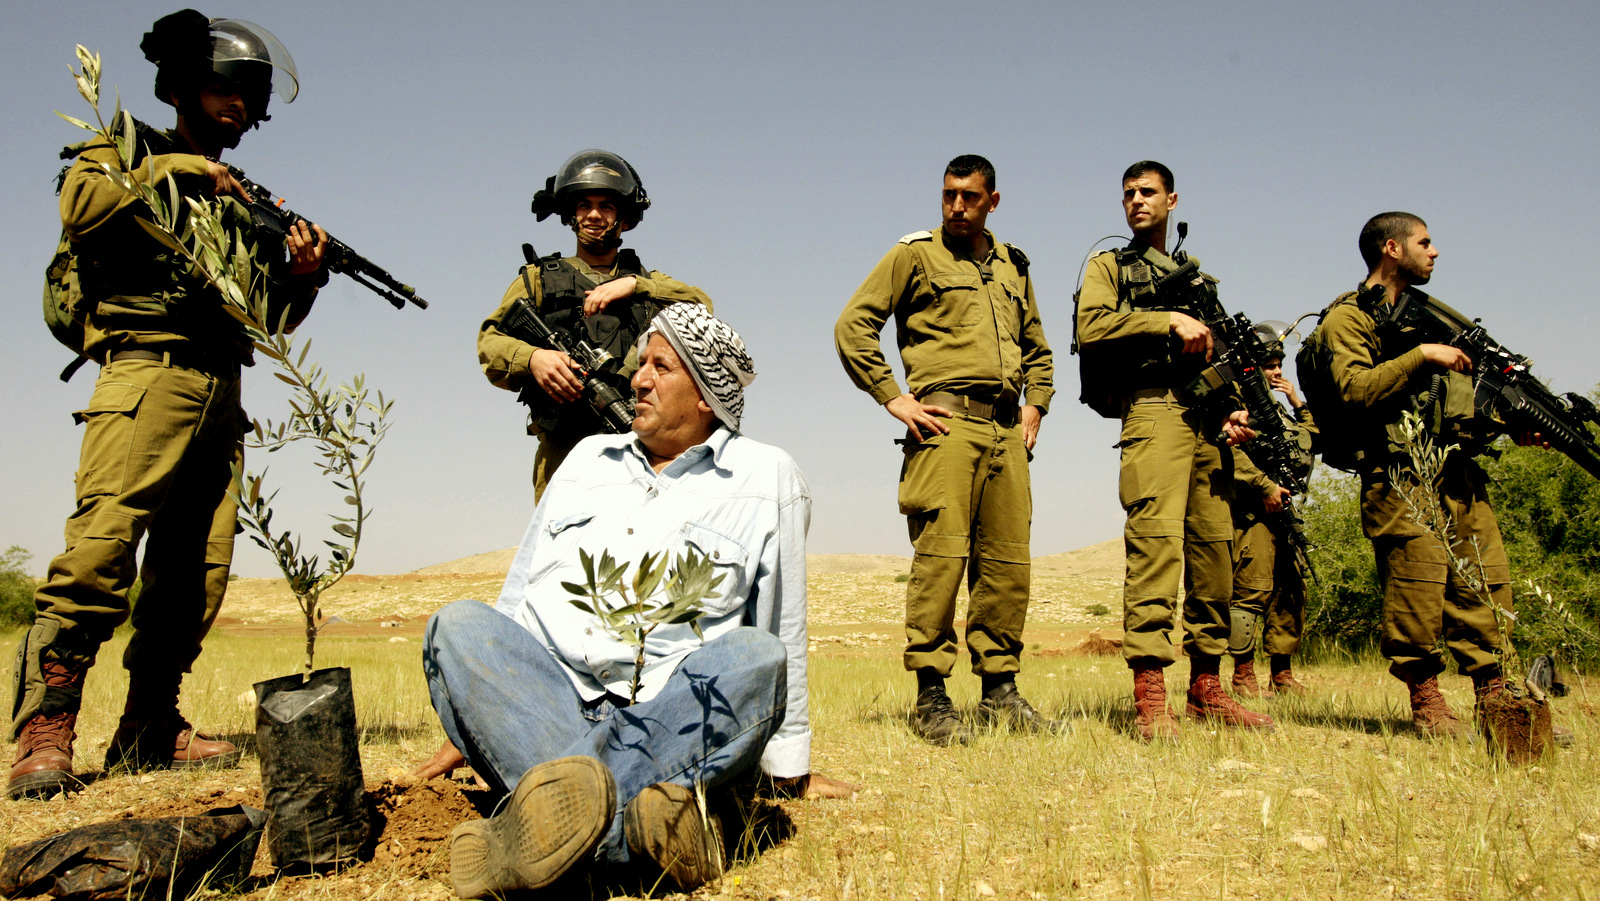 A Palestinian farmer looks at Israeli army soldiers after he planted an olive trees near the West Bank town of Tubas in the Jordan valley, during a protest against the closure of land to Palestinians by the army and Jewish settlers, Tuesday, April 8, 2014. (AP/Mohammed Ballas)